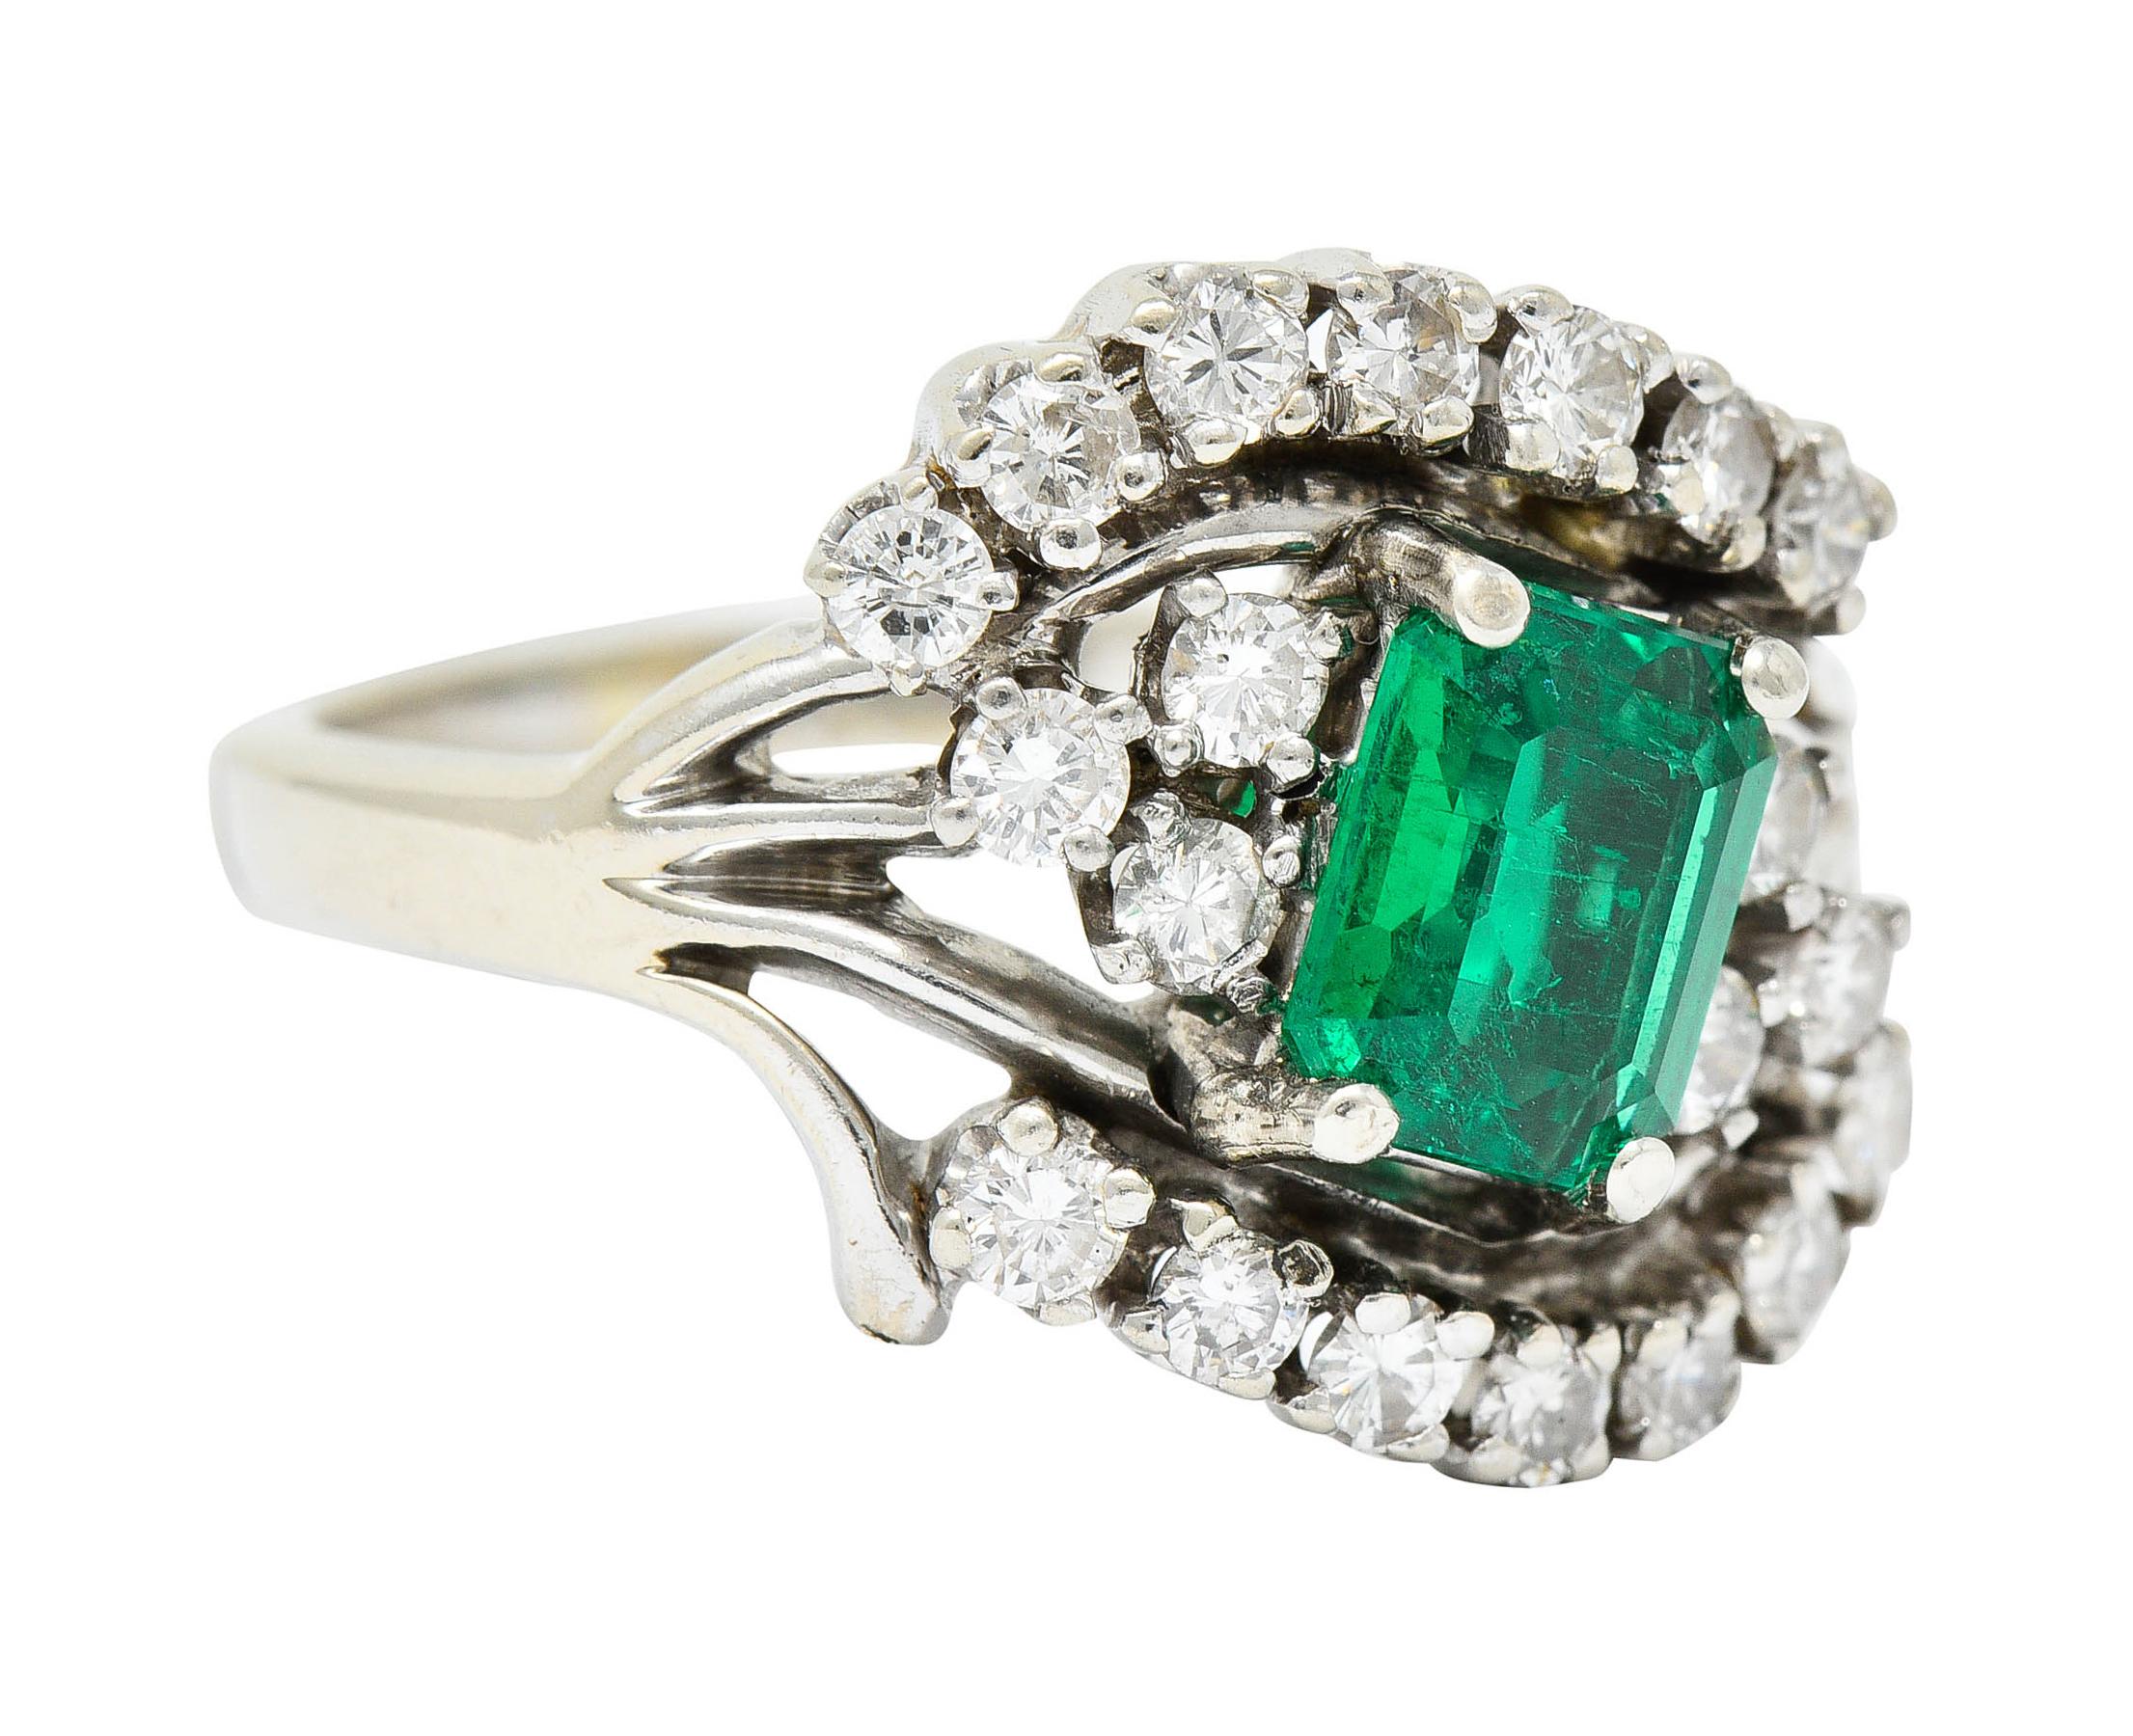 Stylized bypass ring centers an emerald cut emerald weighing approximately 0.99 carat

Strongly green in color and semi-transparent with natural inclusions

Surrounded by round brilliant cut diamonds weighing in total approximately 0.60 carat

Very